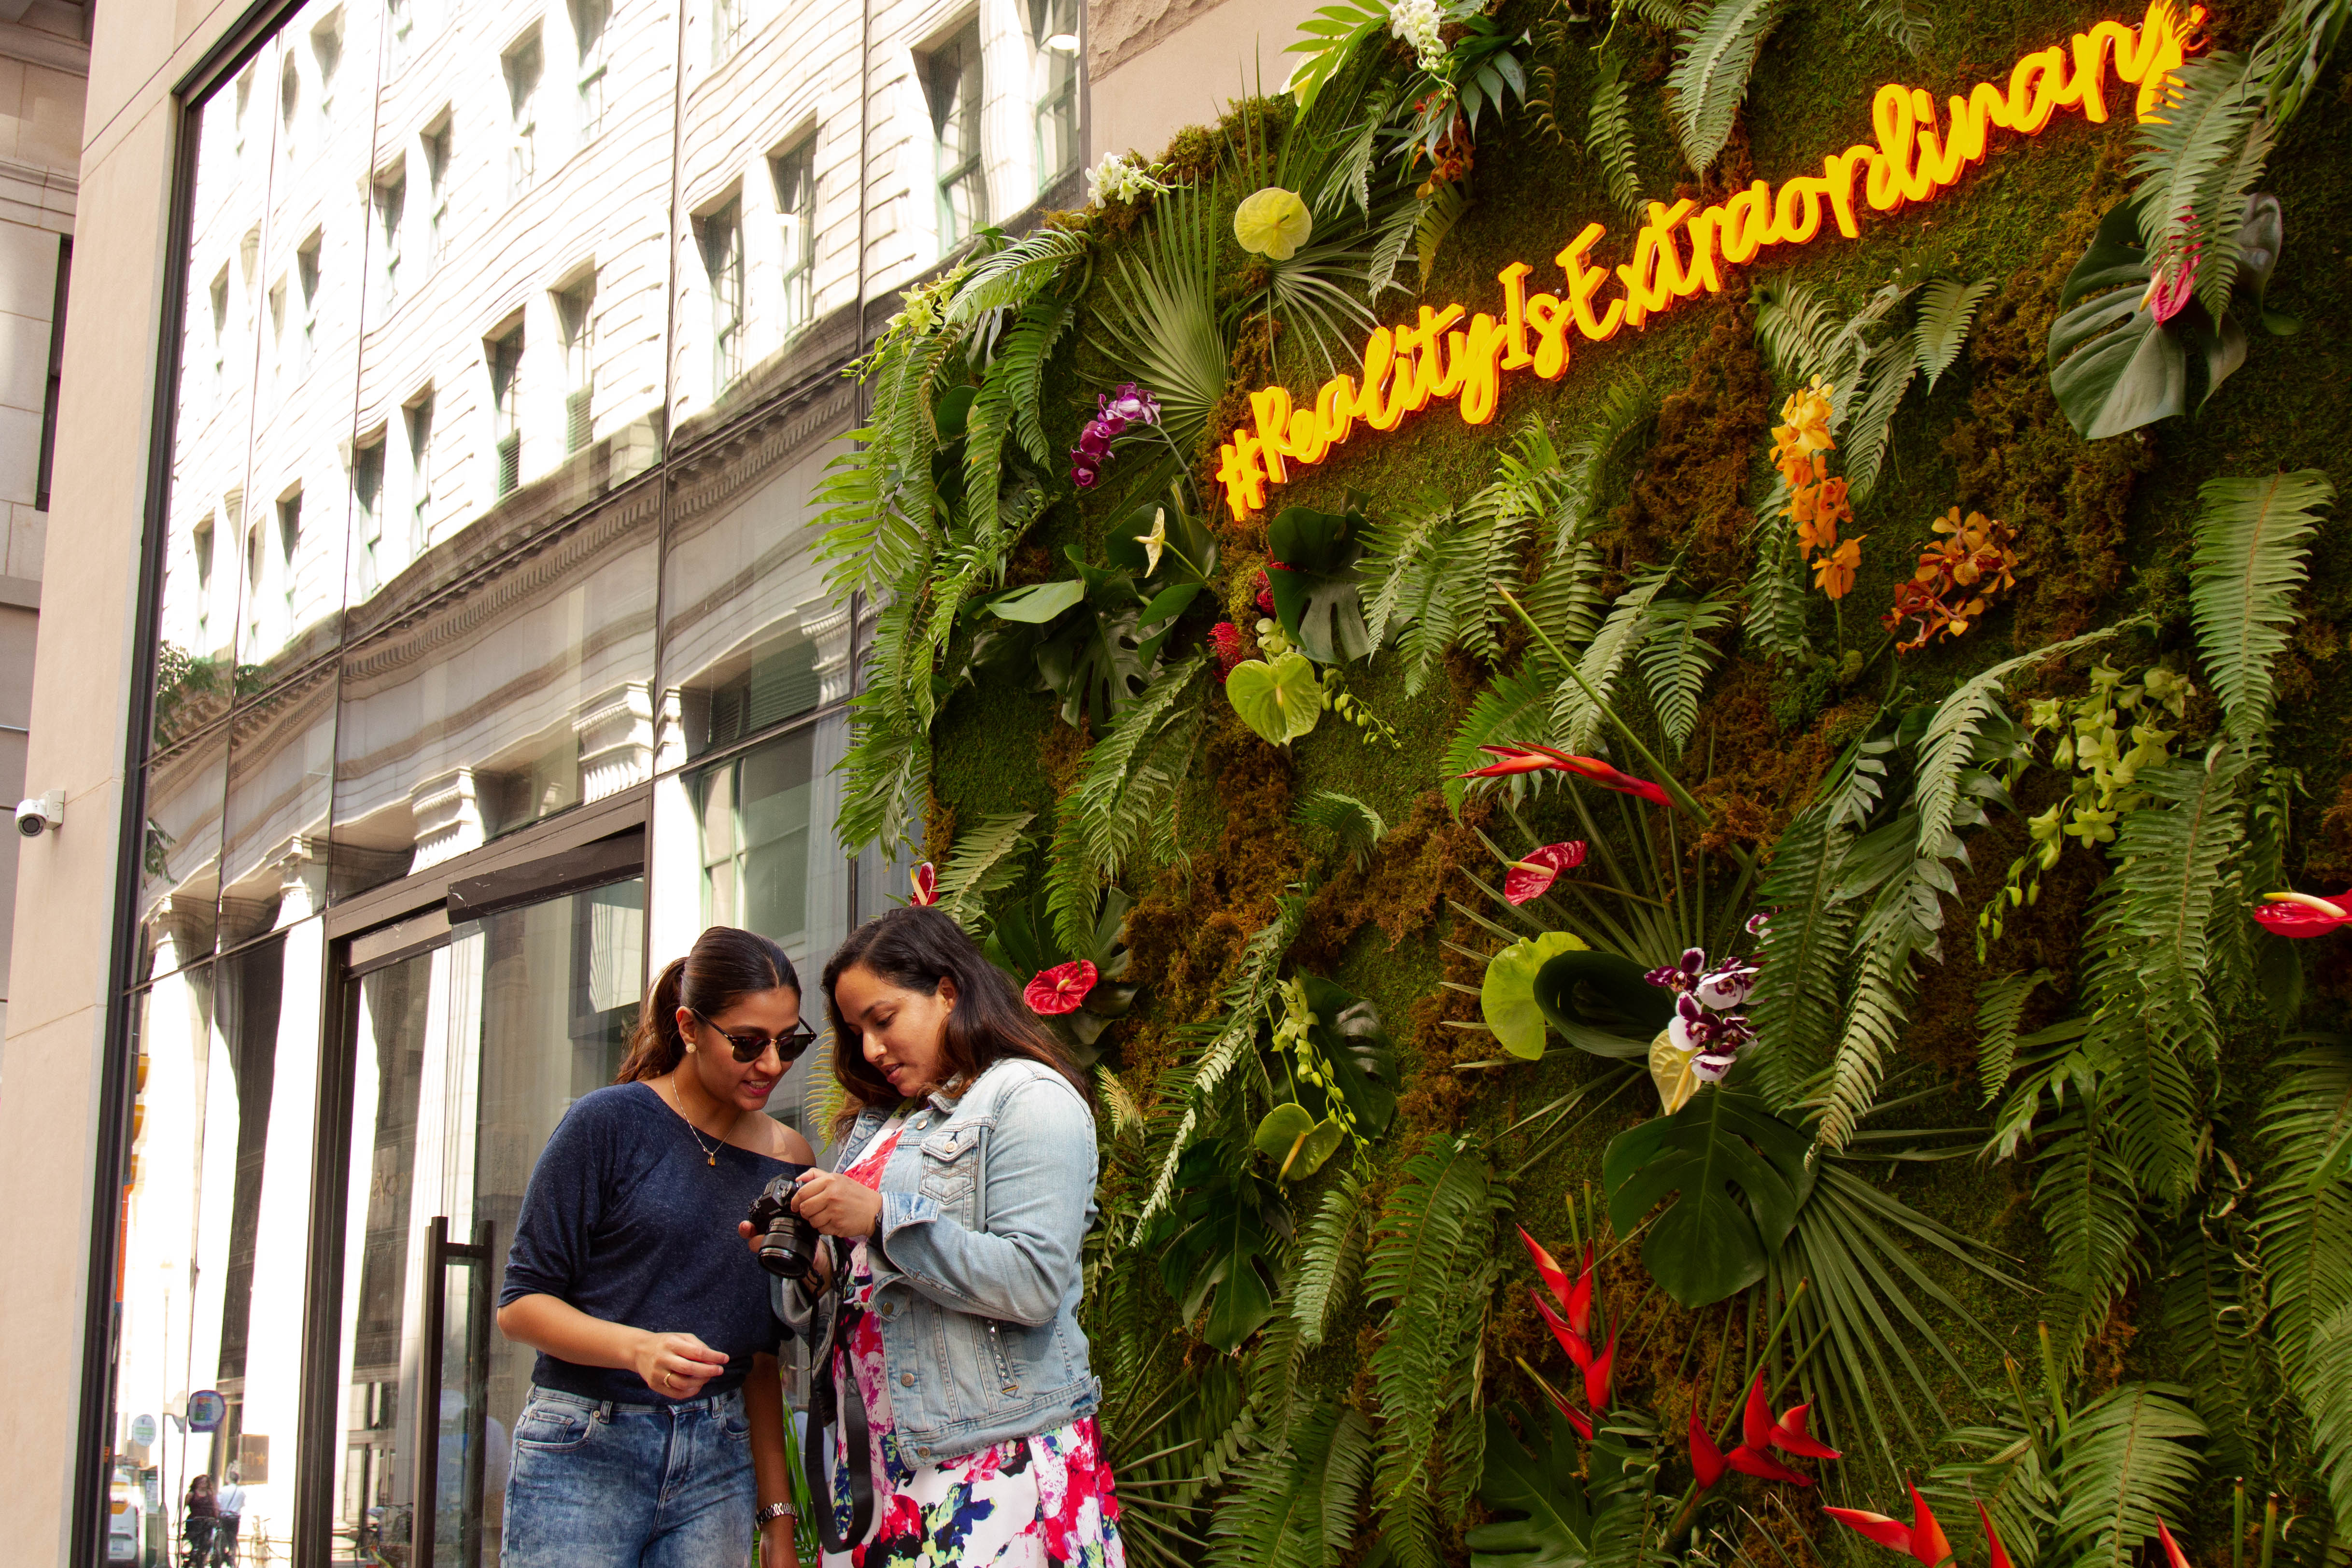 The Latin American-inspired womenswear brand Americae launched its floral pop-up wall experience yesterday at Juniper and Chestnut Streets. Greta Anderson / AL DÍA News
